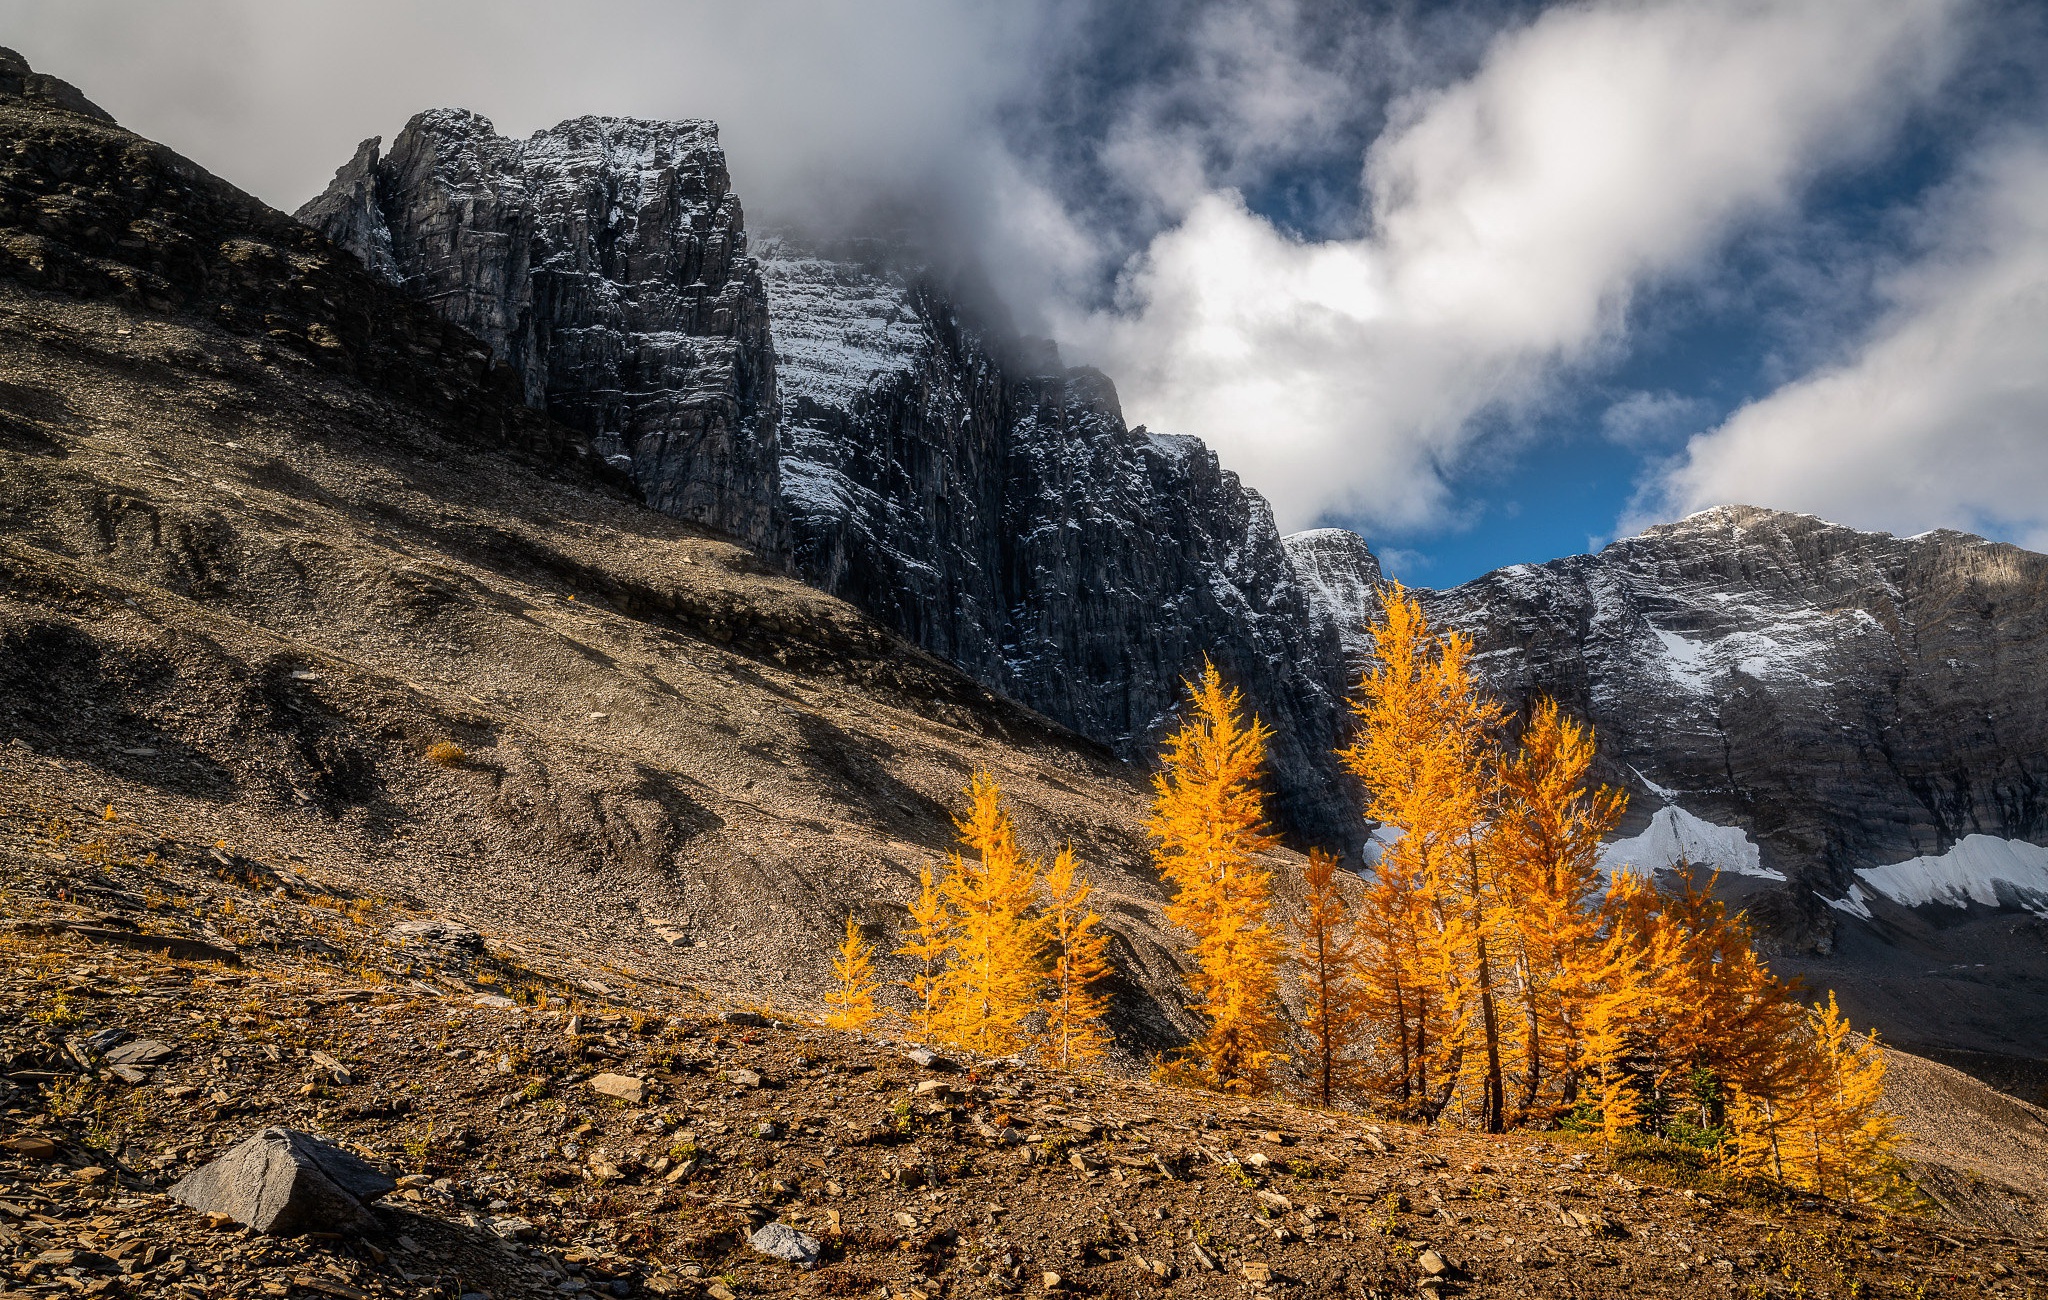 General 2048x1300 nature mountains landscape fall